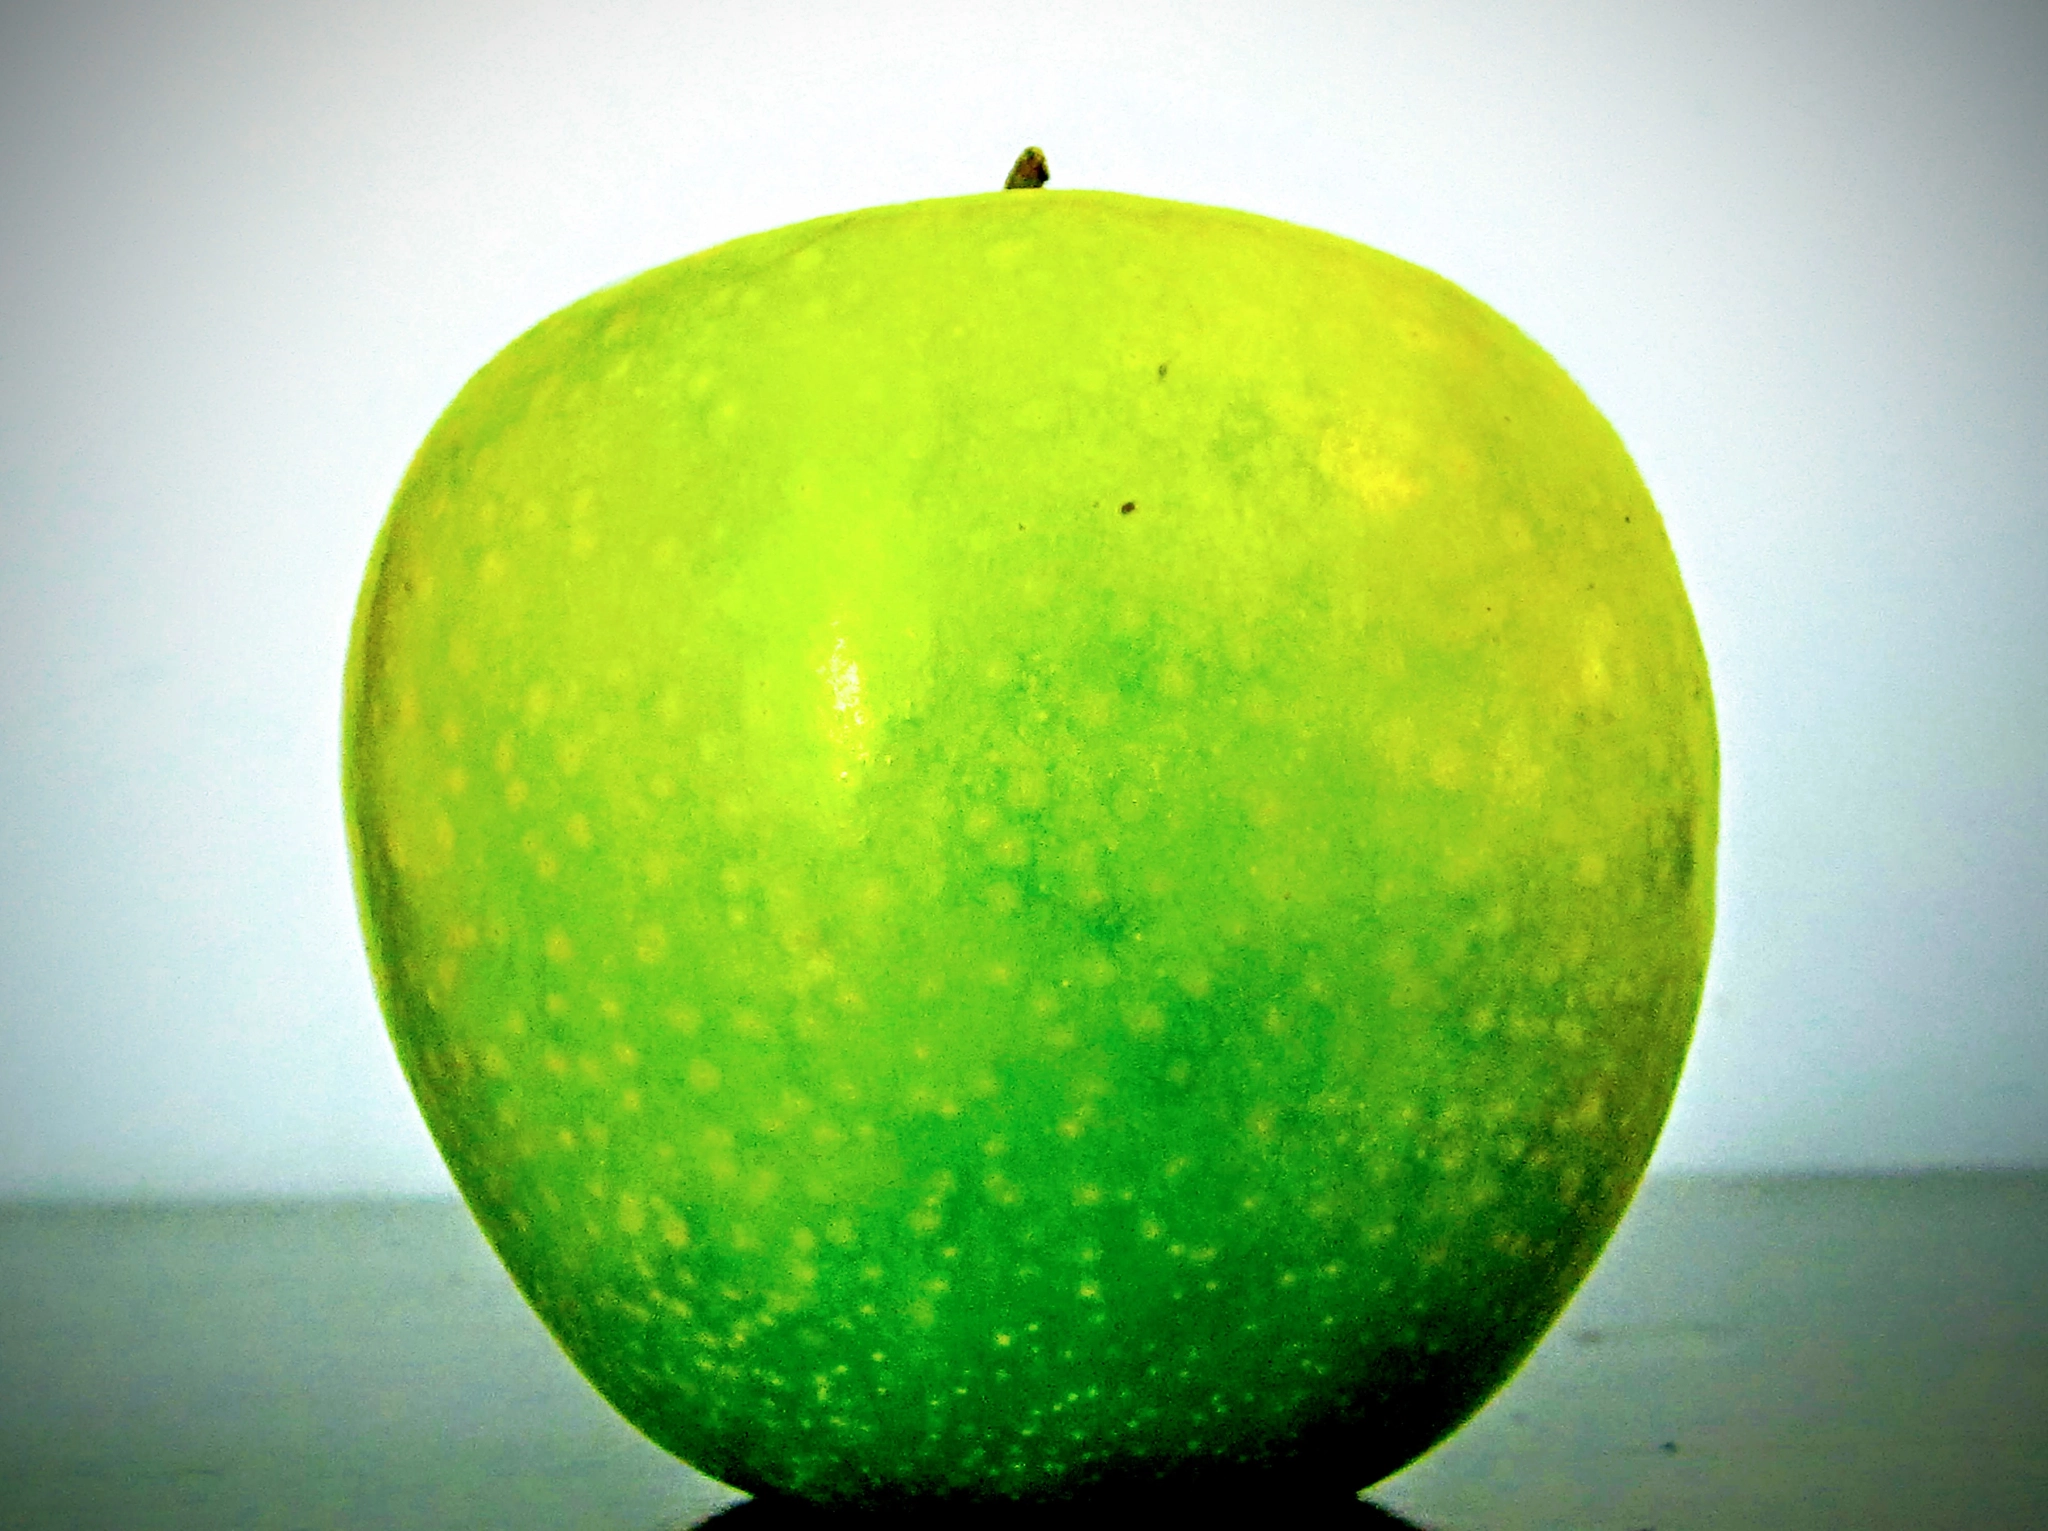 Canon PowerShot ELPH 100 HS (IXUS 115 HS / IXY 210F) sample photo. Green apple:sophie' point and shoot photography